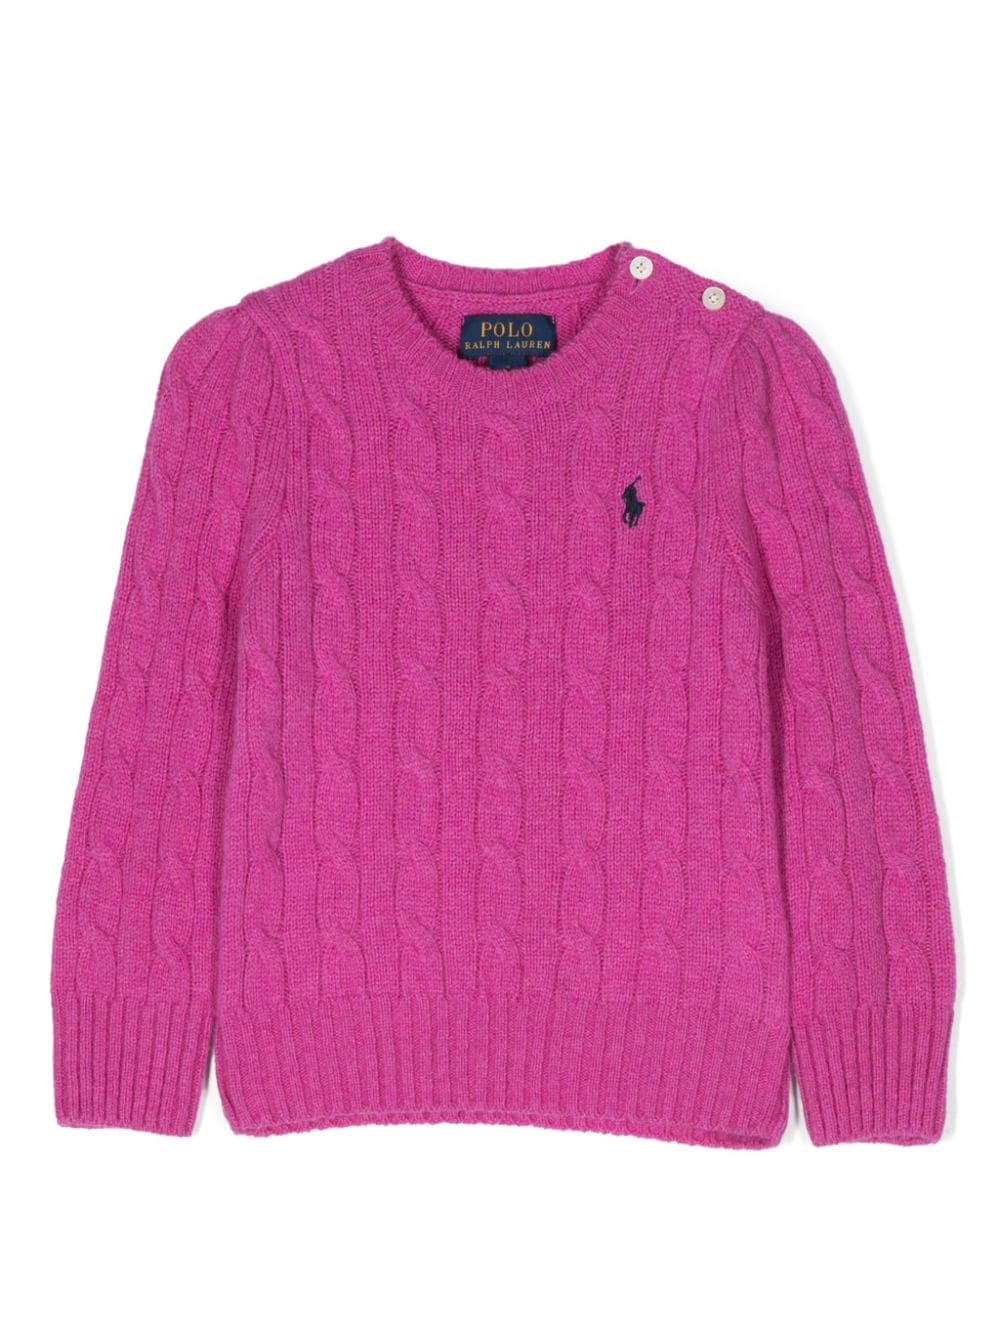 POLO RALPH LAUREN CABLE CN SWEATER PULLOVER